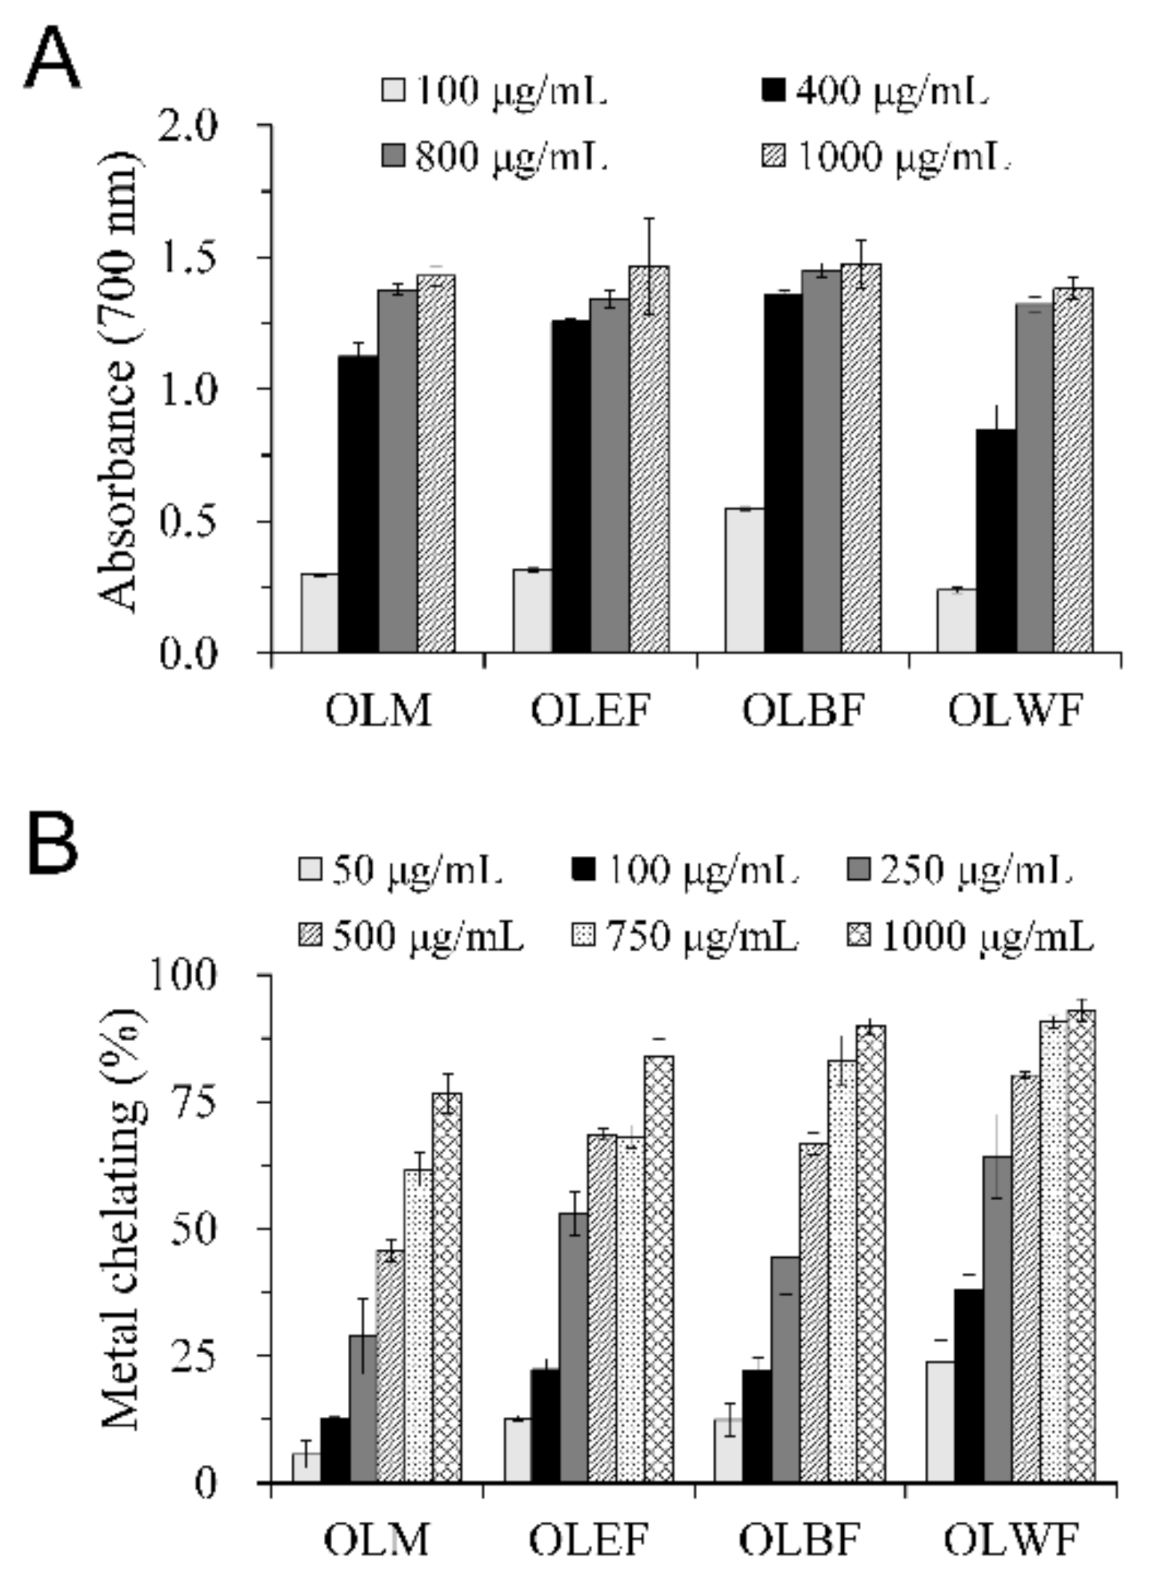 Plants | Free Full-Text | Oenothera laciniata Hill Extracts Exhibits  Antioxidant Effects and Attenuates Melanogenesis in B16-F10 Cells via  Downregulating CREB/MITF/Tyrosinase and Upregulating p-ERK and p-JNK